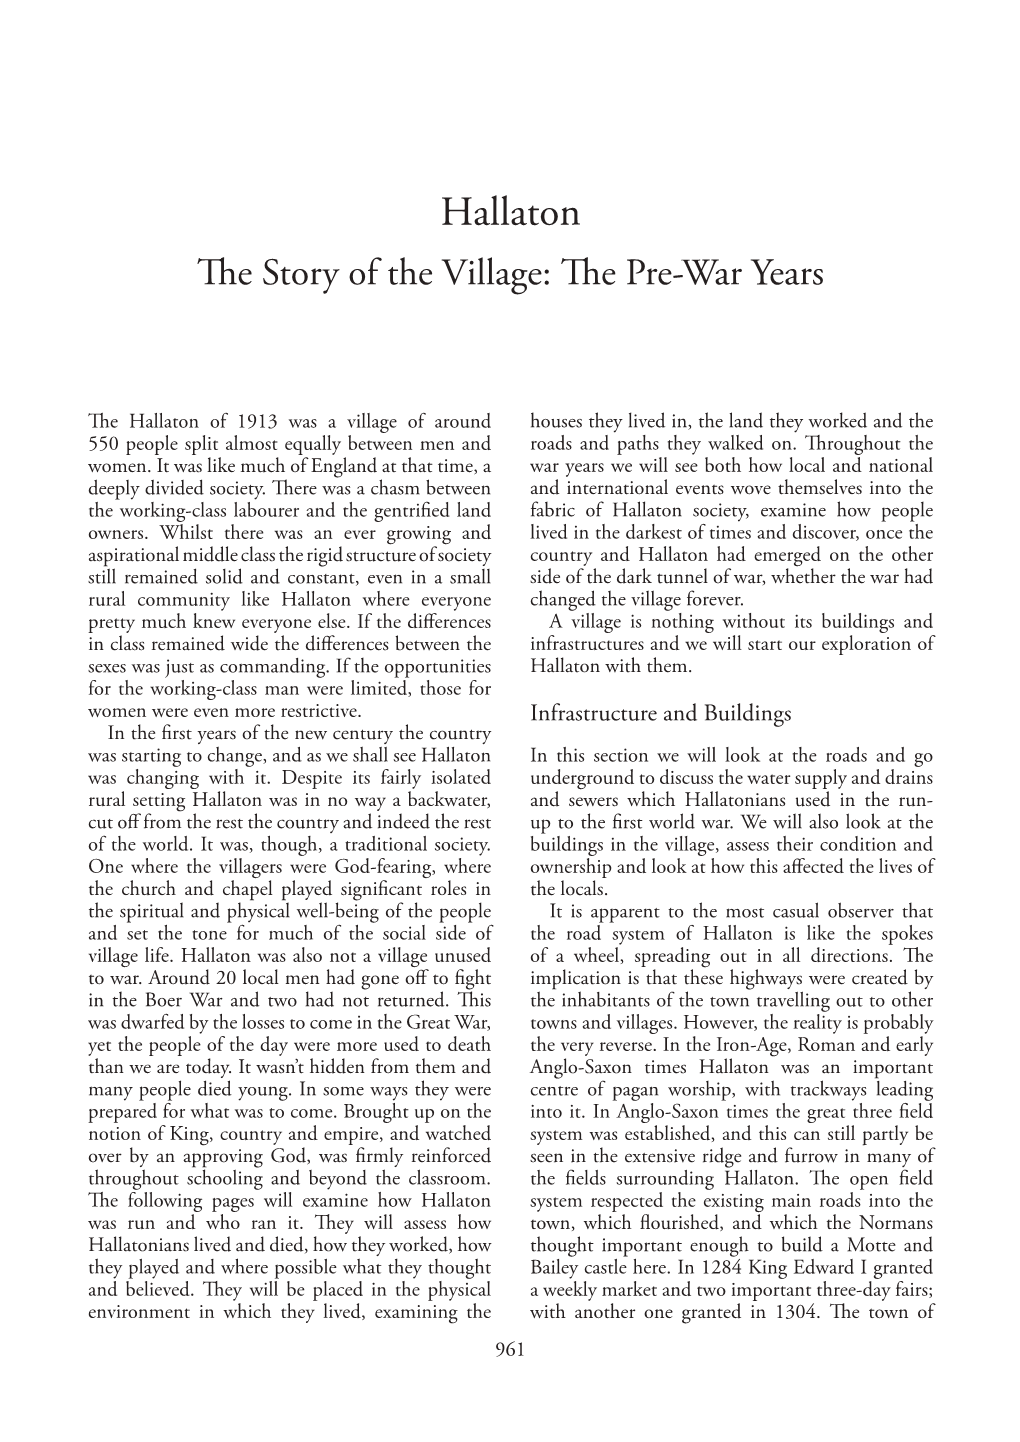 Hallaton the Story of the Village: the Pre-War Years